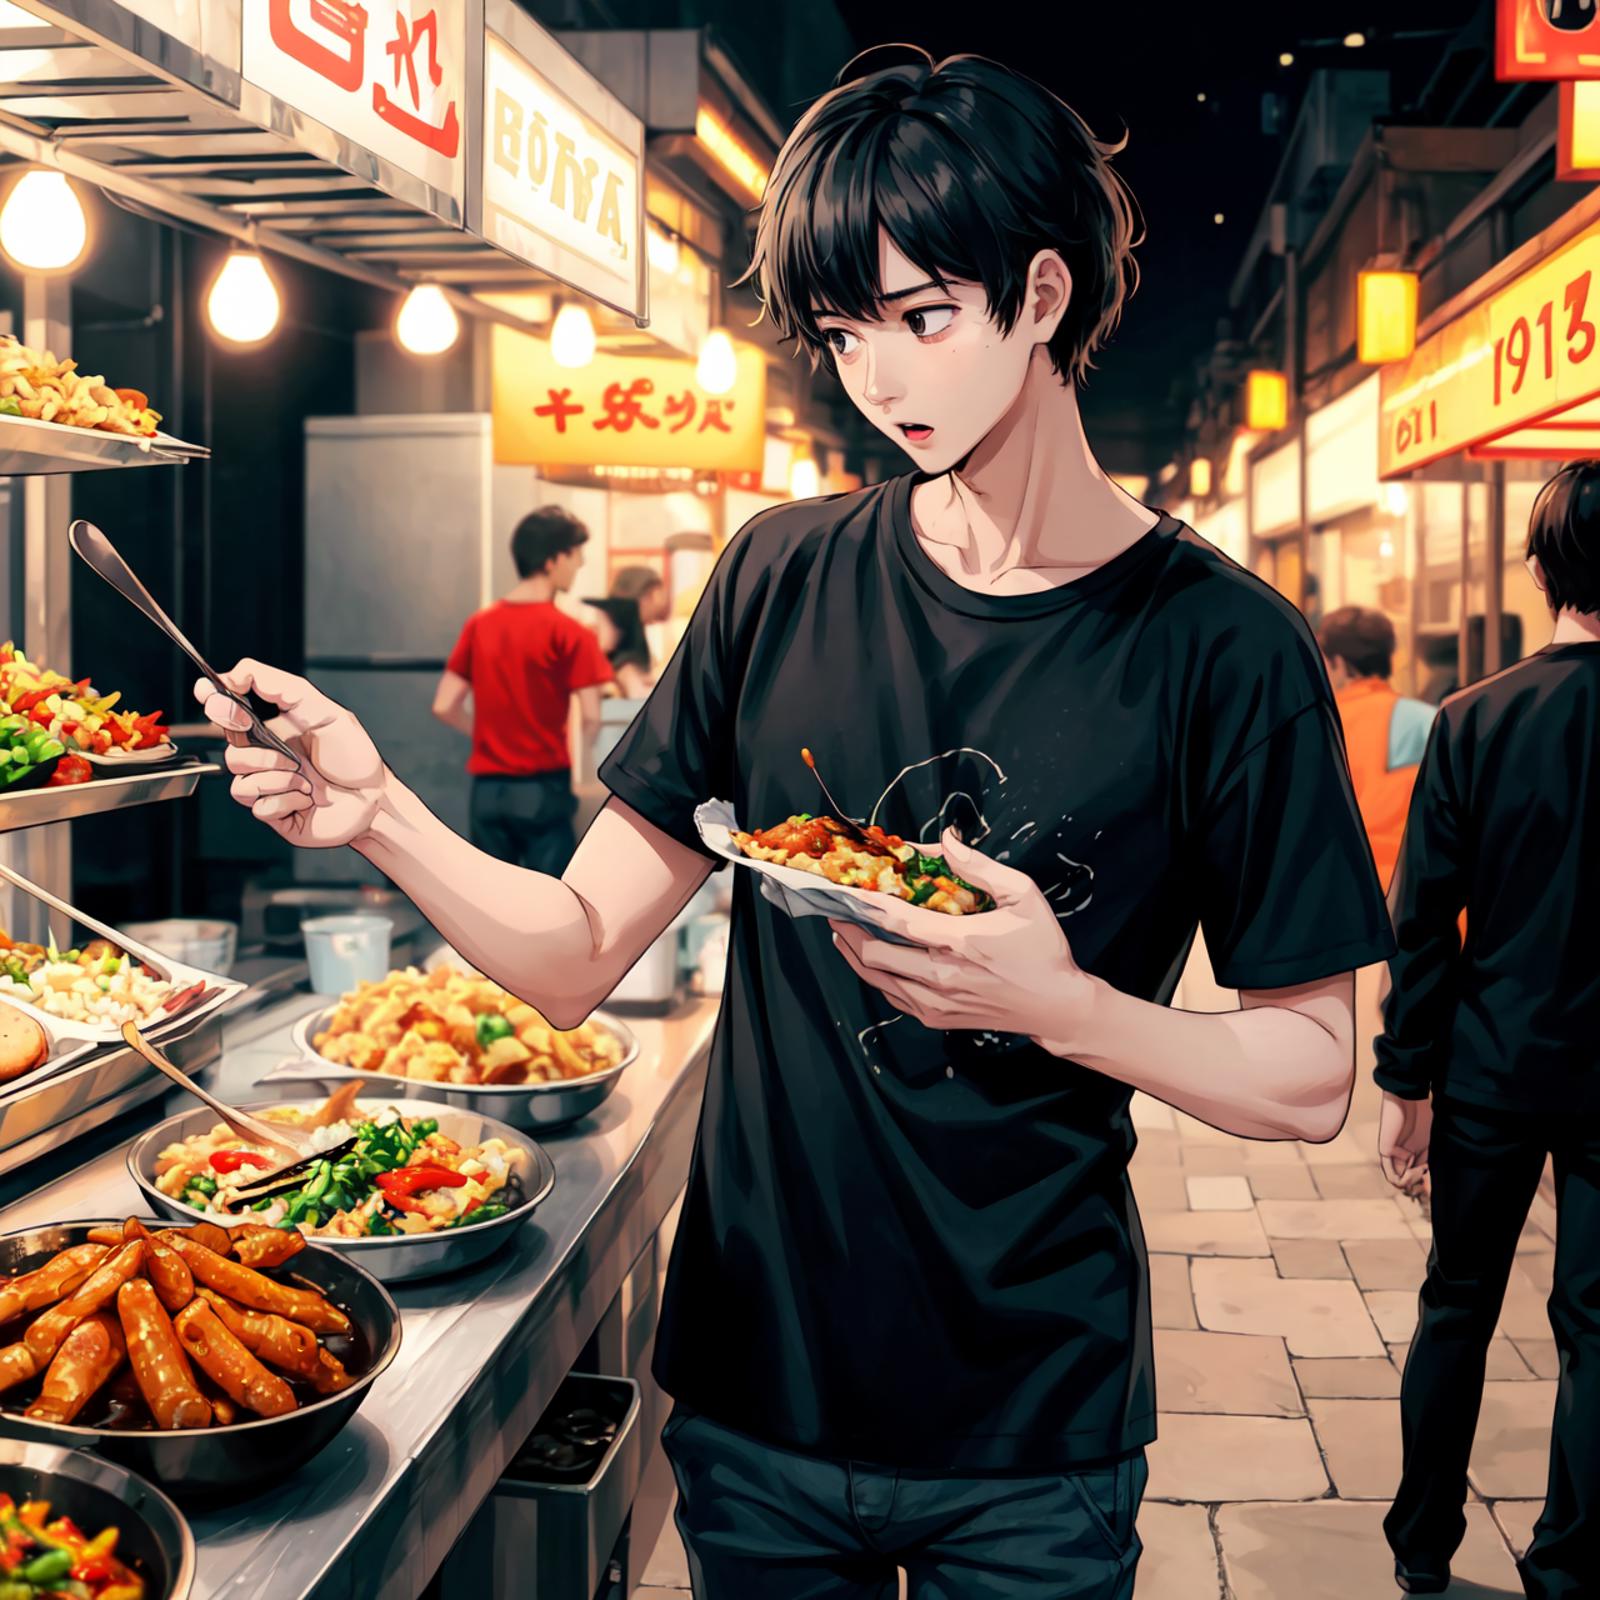 A man with a plate of food, looking at his options in a food court.